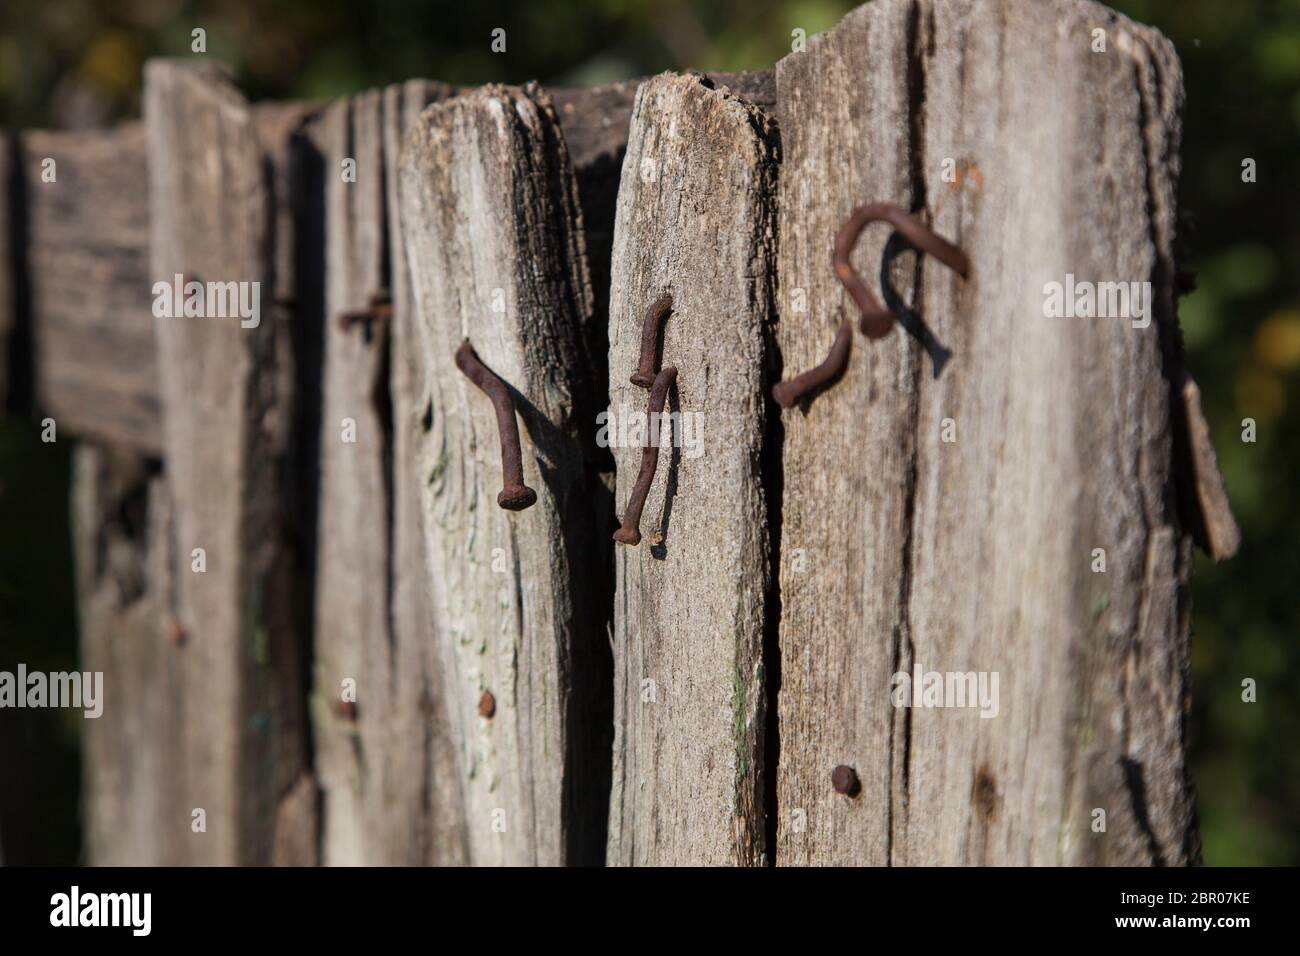 Part of the old worn-out wooden fence with rusty nails sticking out/Сloseup of old fence with nails Stock Photo